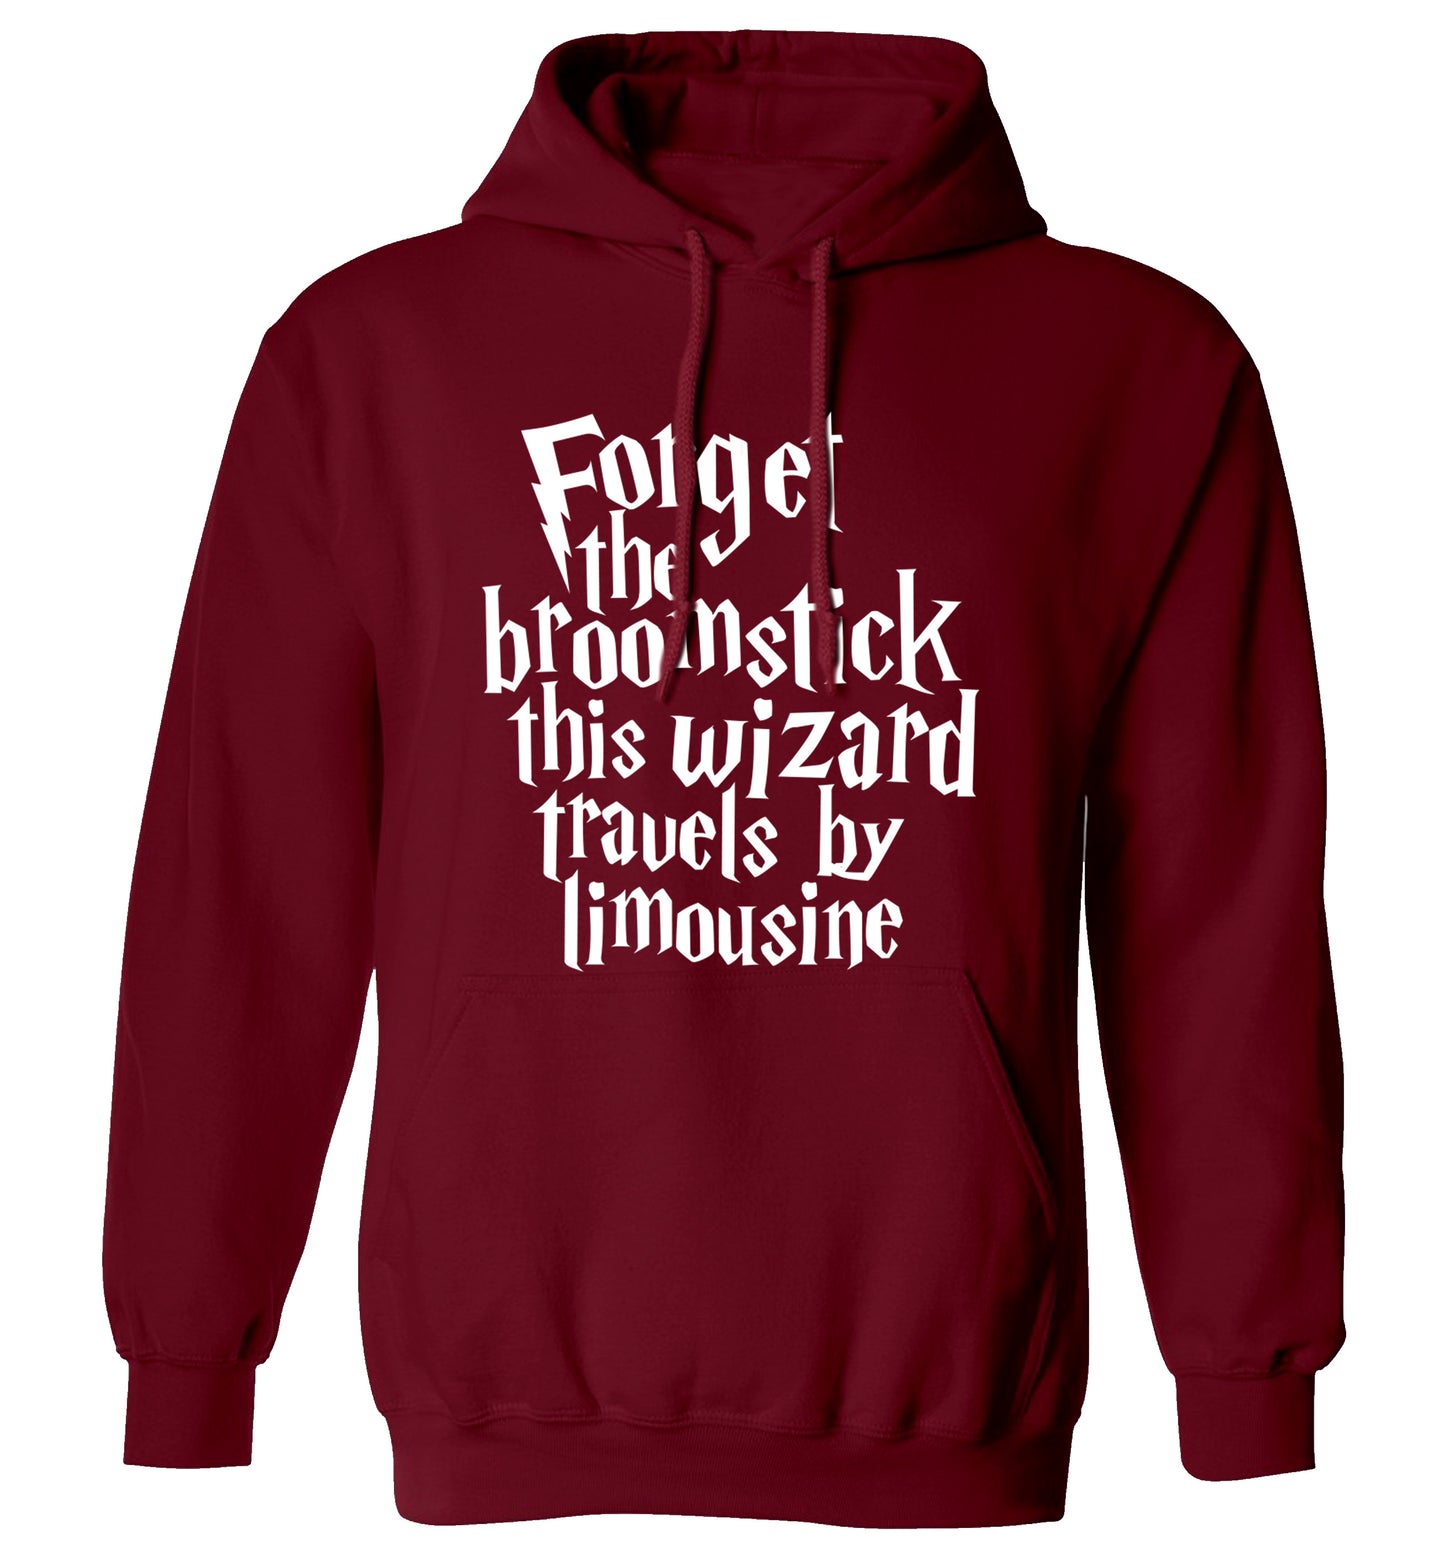 Forget the broomstick this wizard travels by limousine adults unisexmaroon hoodie 2XL